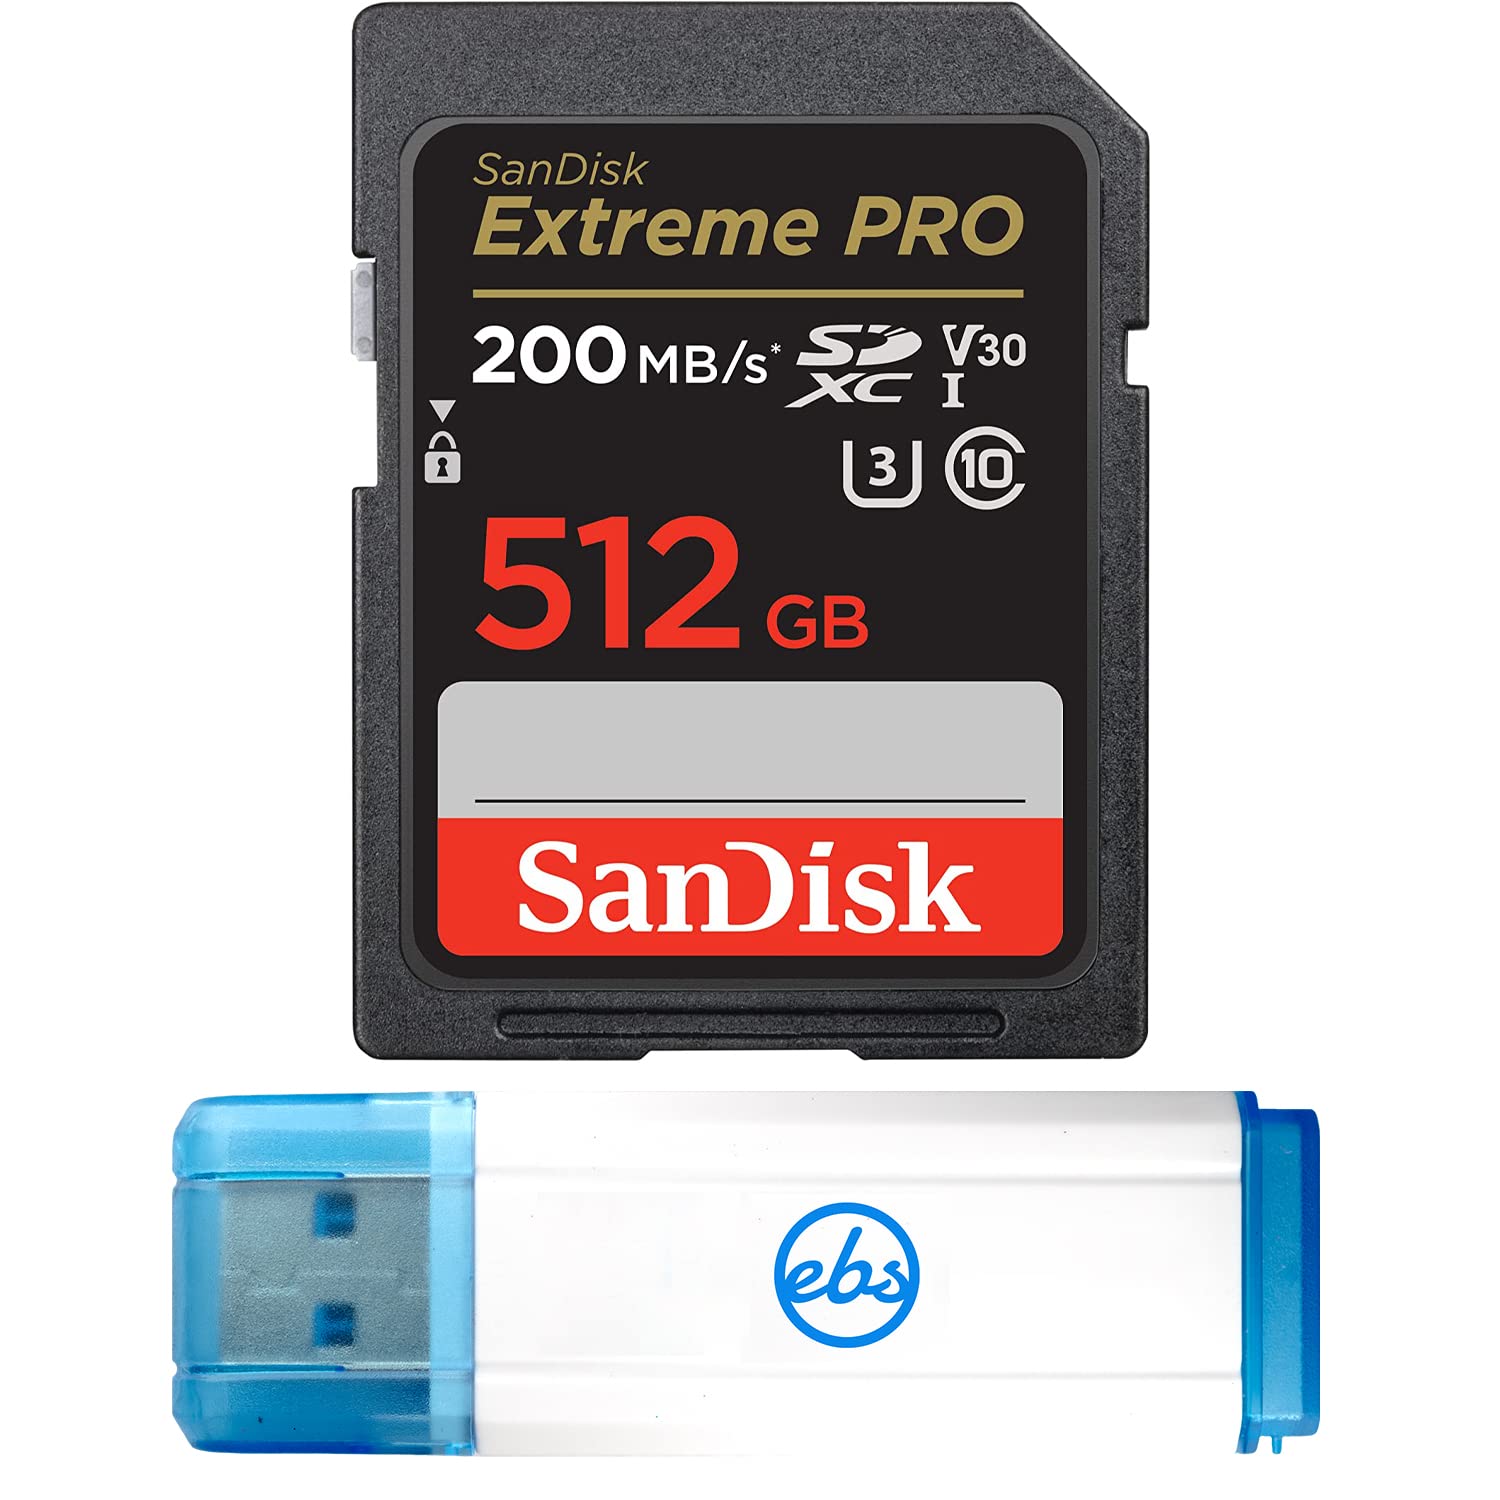 SanDisk 512GB Extreme Pro SD Memory Card SDXC Card for Sony Alpha a7C, a6600, a6100, a6400 Camera (SDSDXXD-512G-GN4IN) Class 10 Bundle with (1) Everything But Stromboli 3.0 Micro & SD Card Reader